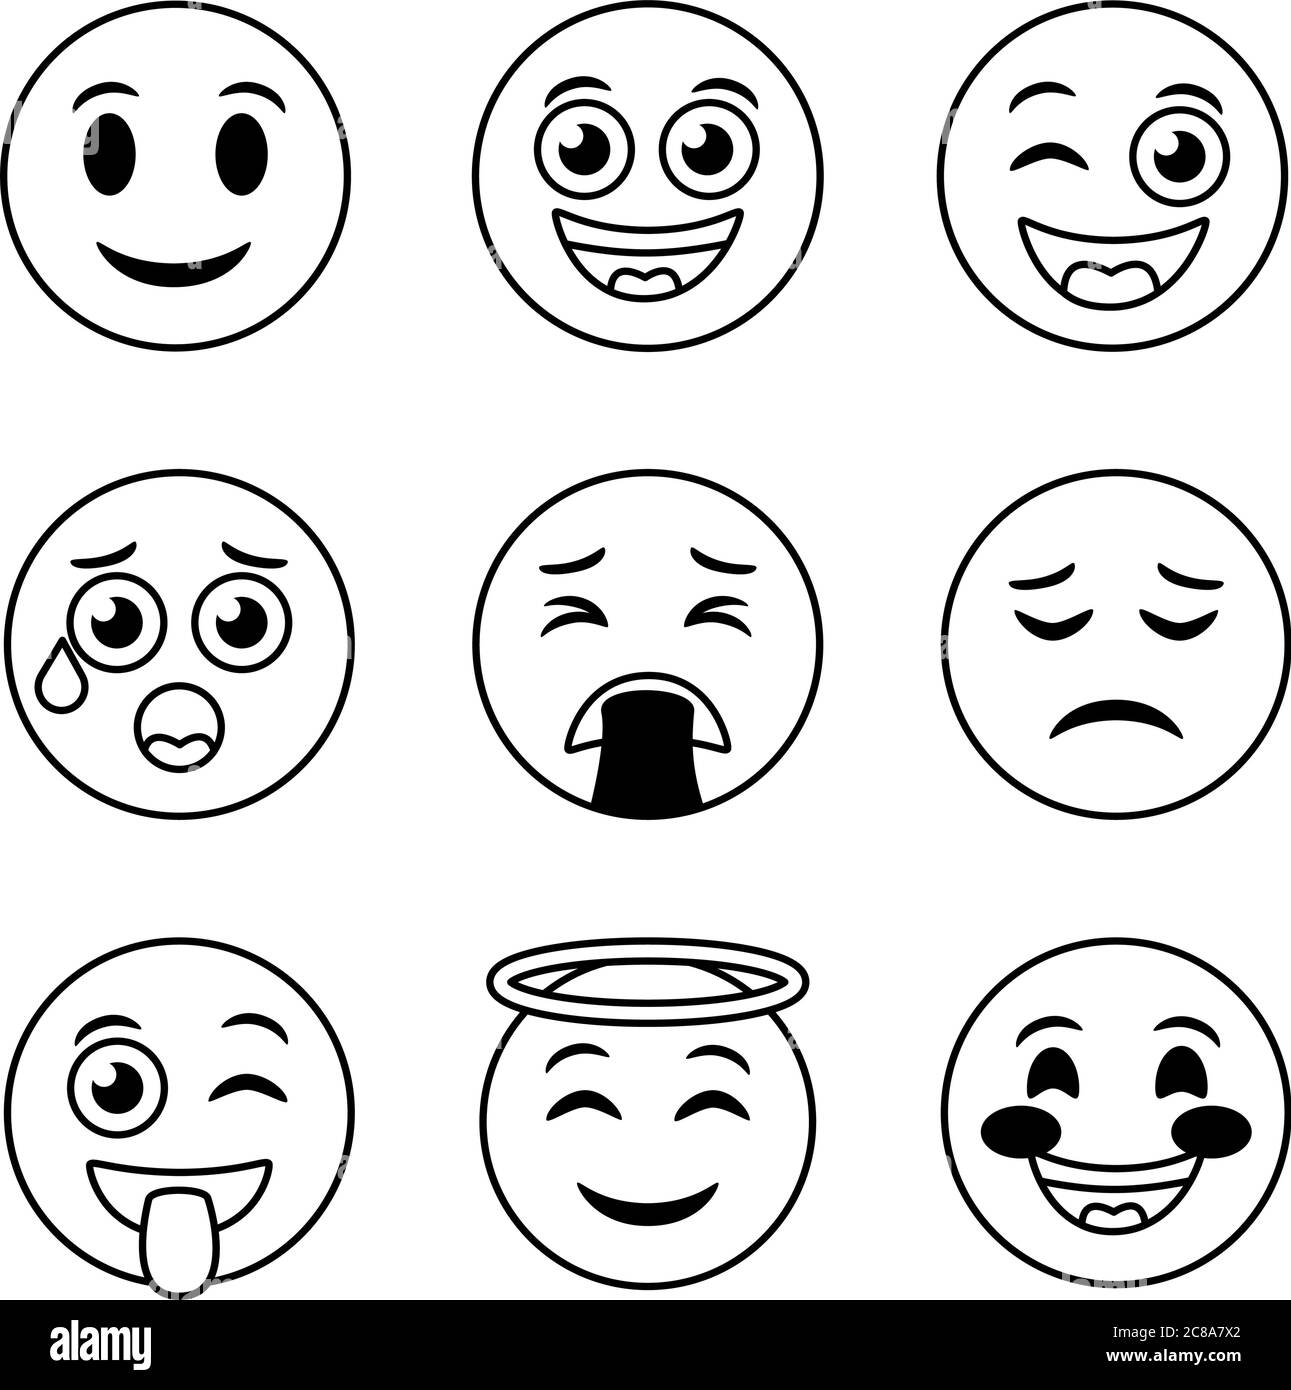 Chat faces illustration Black and White Stock Photos & Images - Alamy